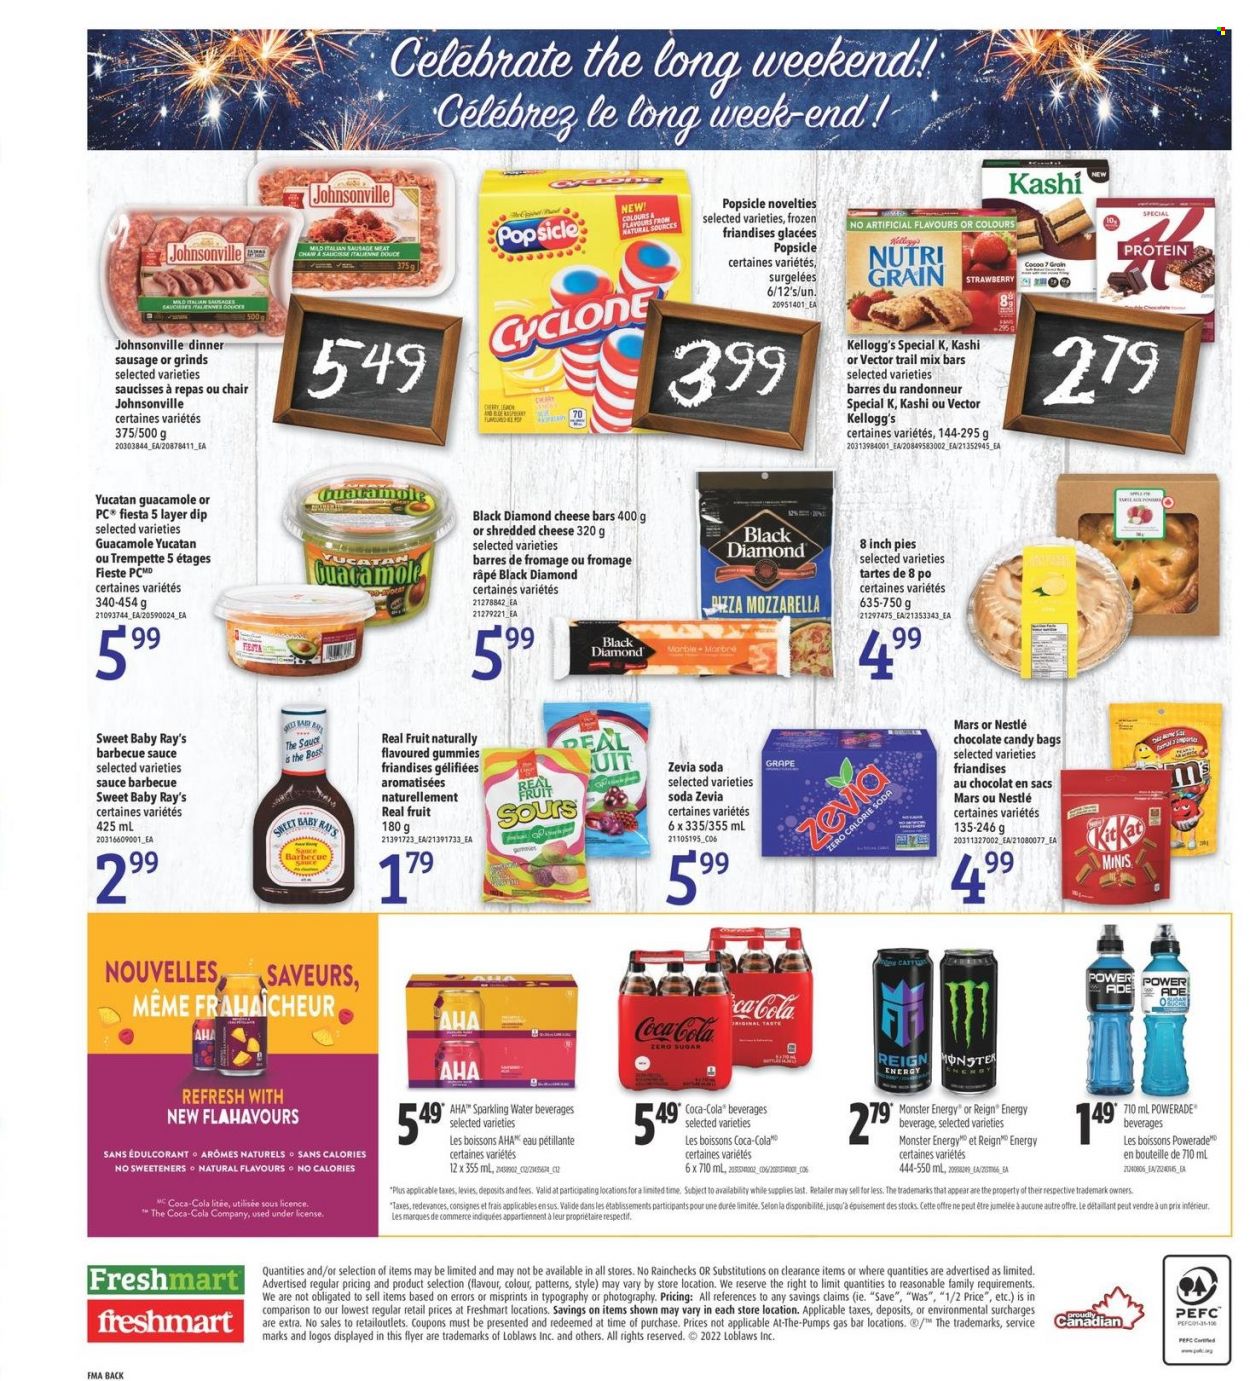 thumbnail - Freshmart Flyer - May 19, 2022 - May 25, 2022 - Sales products - Johnsonville, sausage, italian sausage, guacamole, shredded cheese, dip, Mars, Kellogg's, chocolate candies, cocoa, Nutri-Grain, BBQ sauce, trail mix, Coca-Cola, Powerade, Monster, Monster Energy, soda, sparkling water, sausage meat, mozzarella, Nestlé. Page 14.